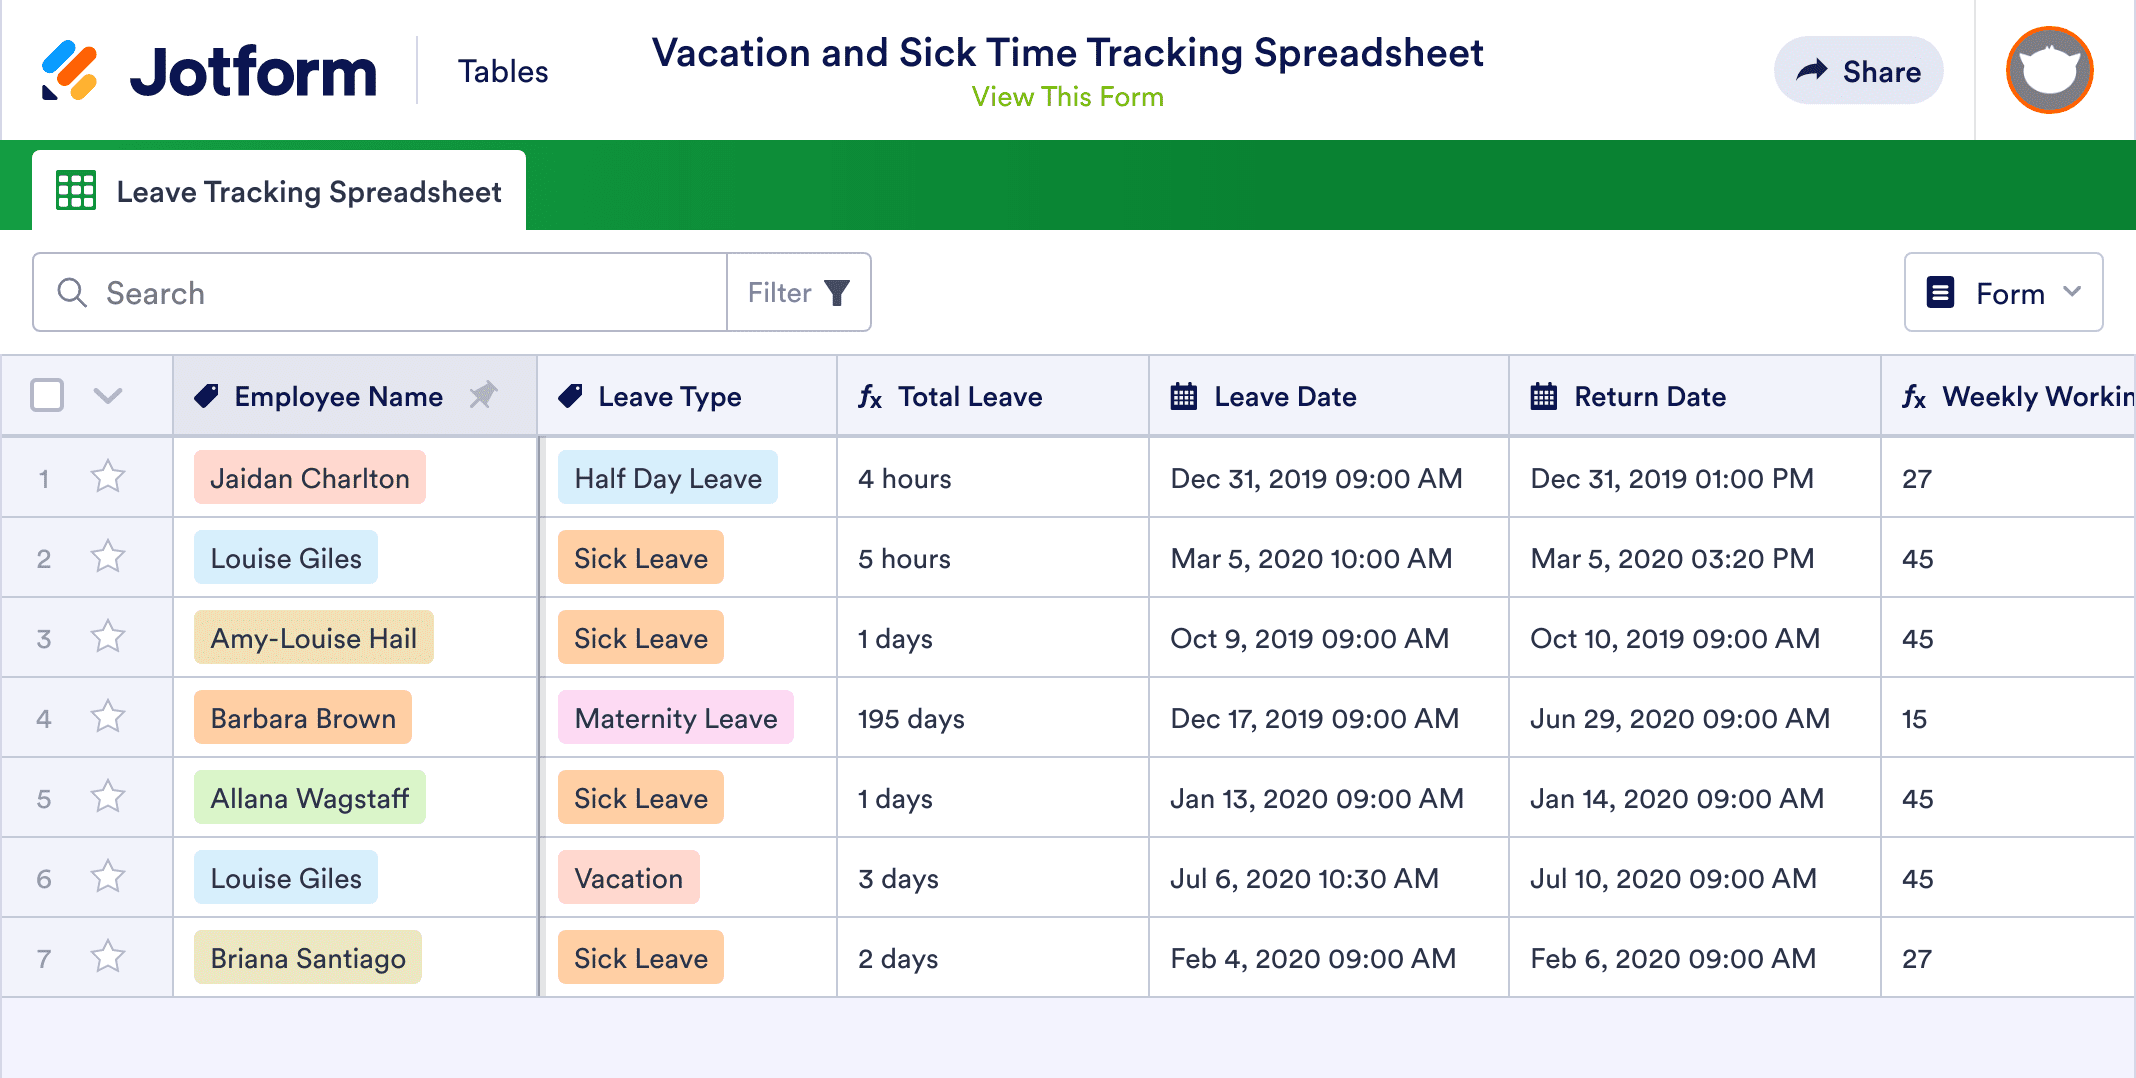 Vacation and Sick Time Tracking Spreadsheet